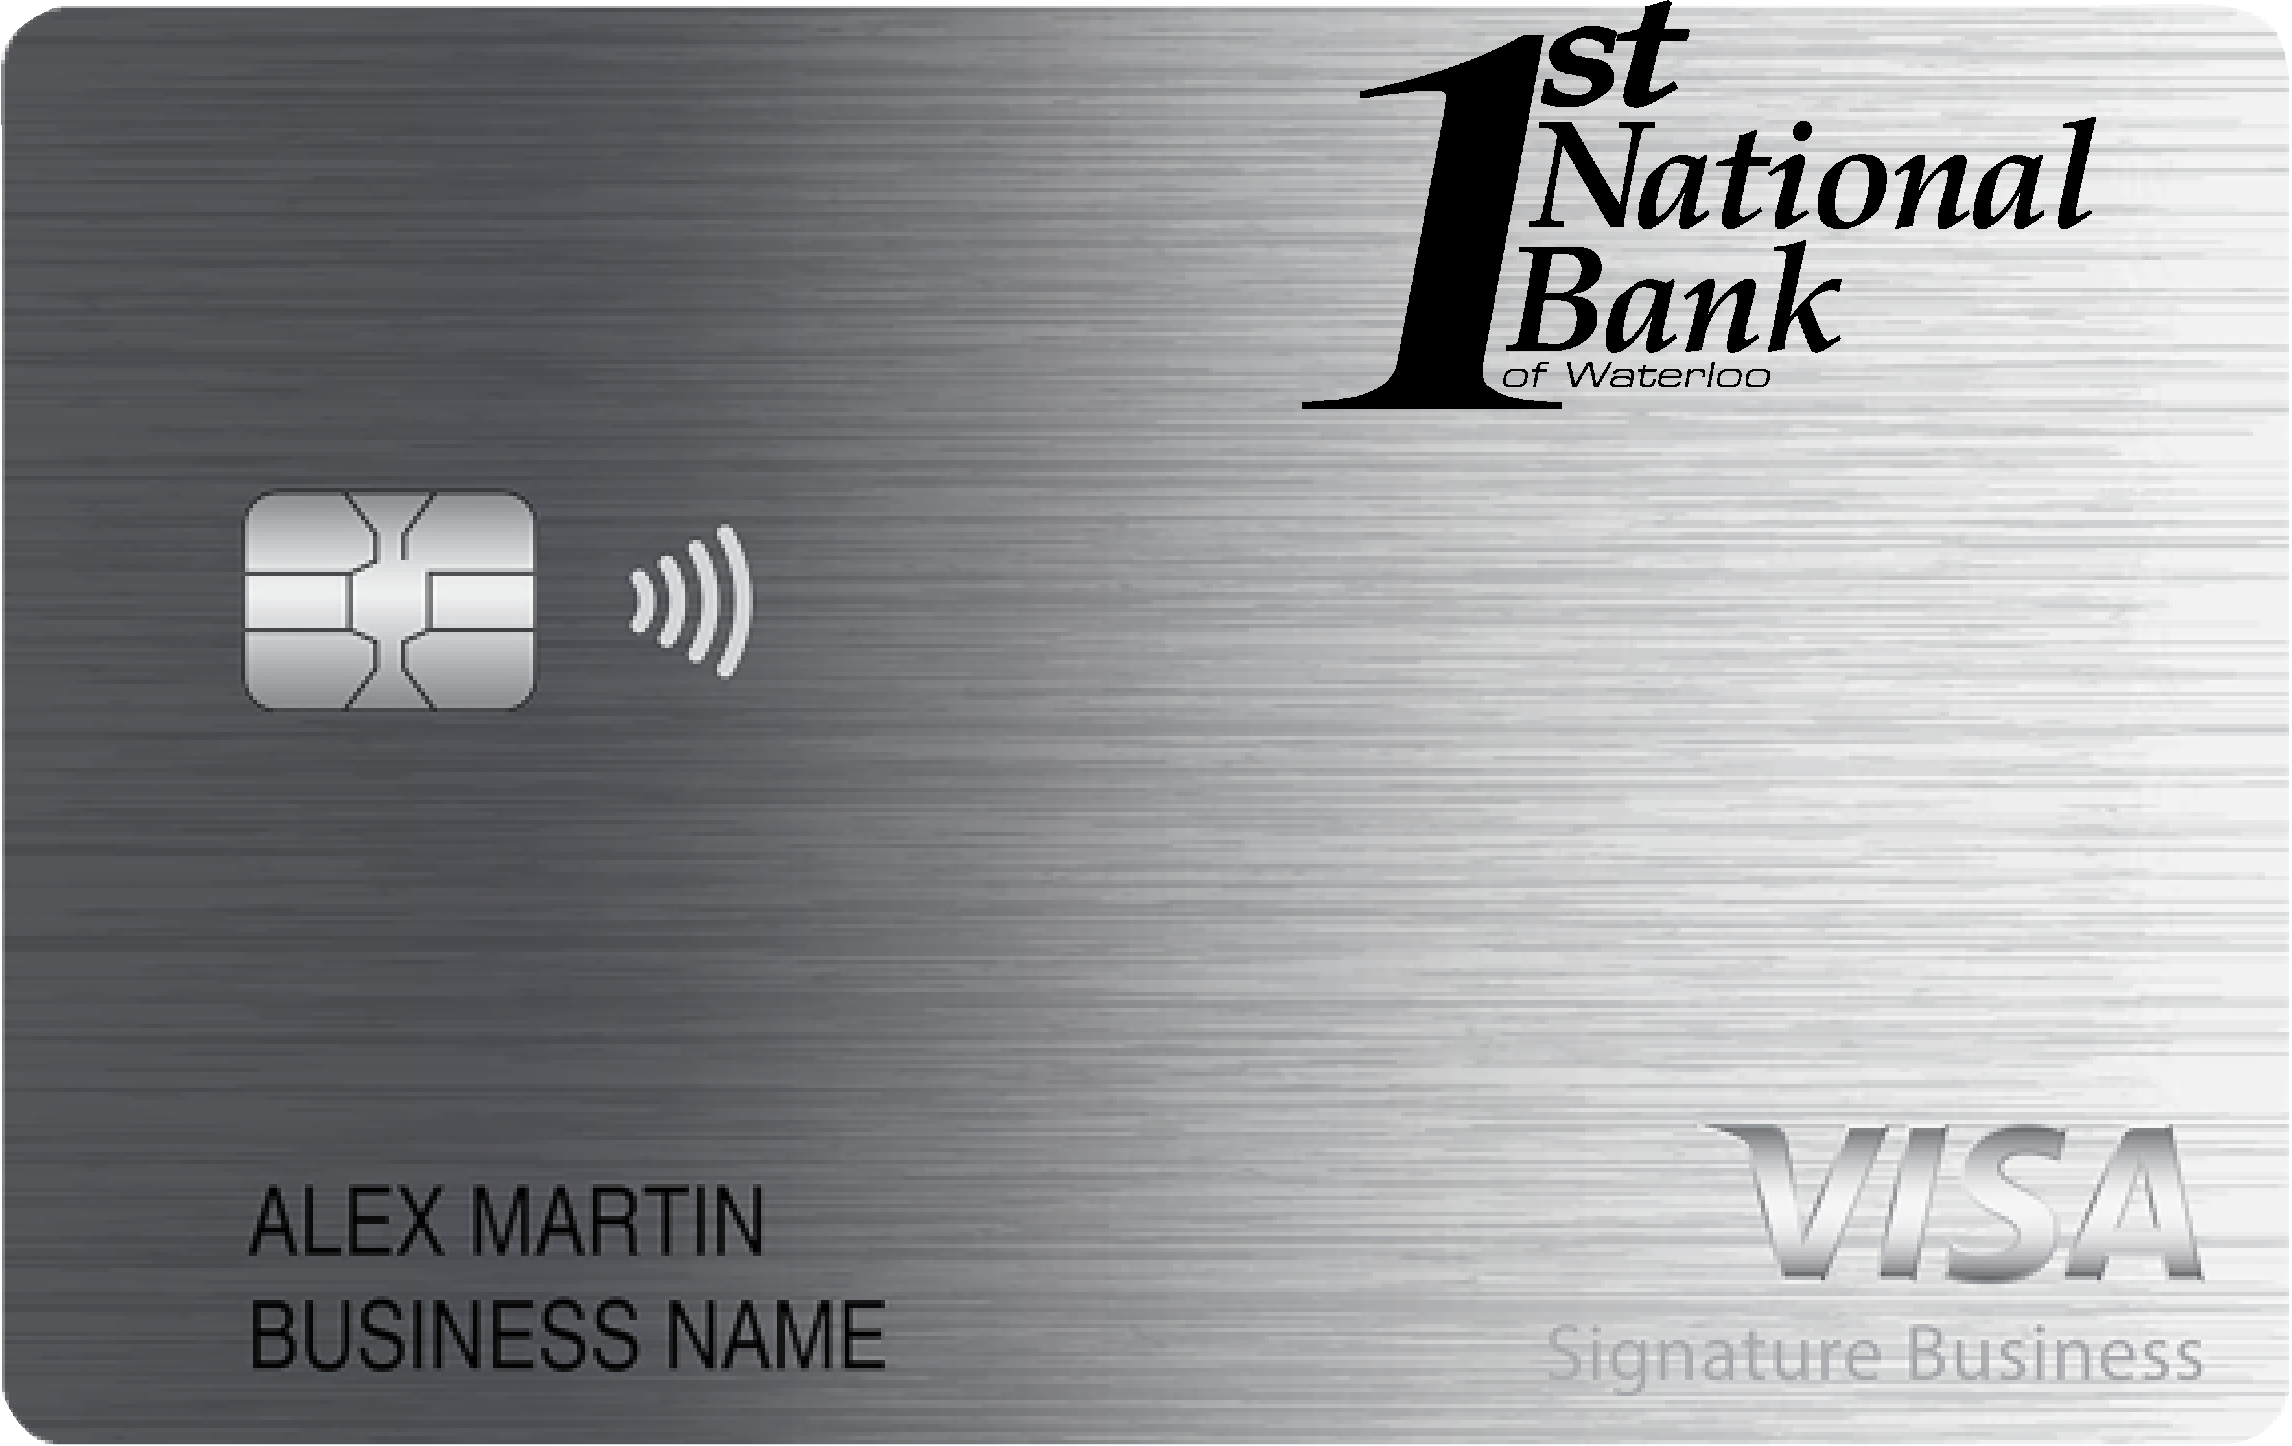 First National Bank of Waterloo Smart Business Rewards Card